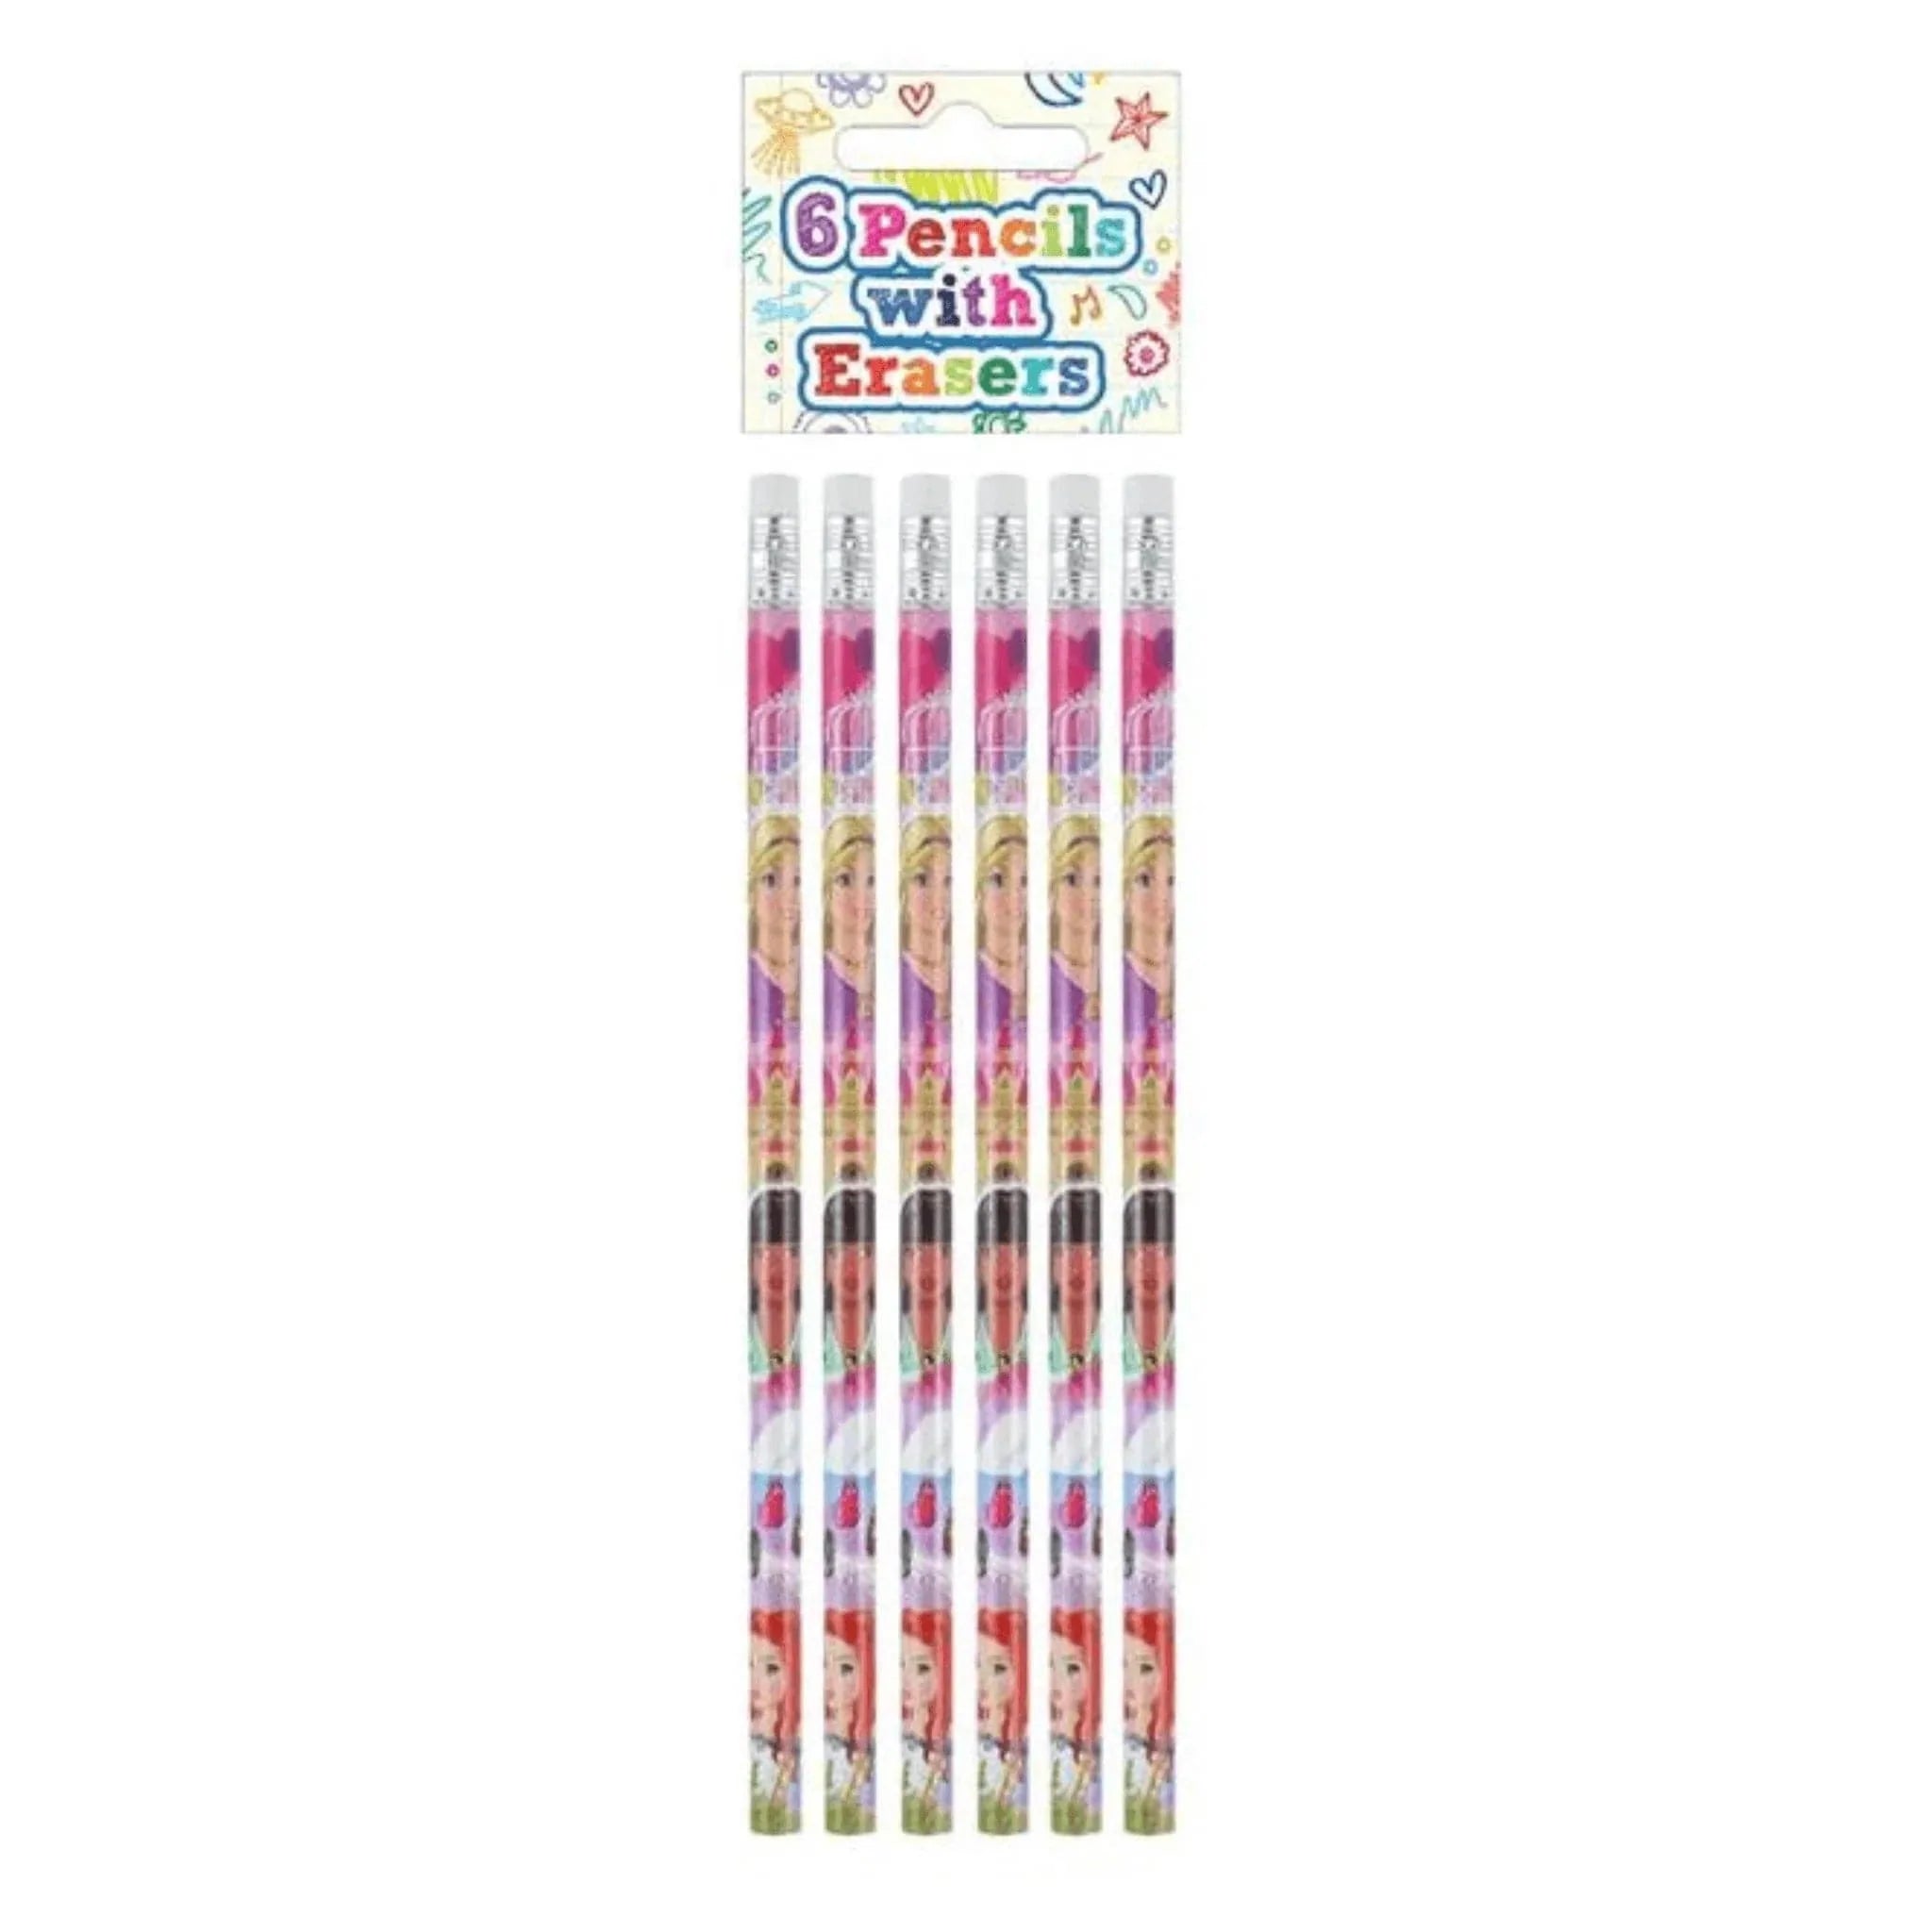 Princess Pencils with Erasers (6 pieces) - Kids Party Craft